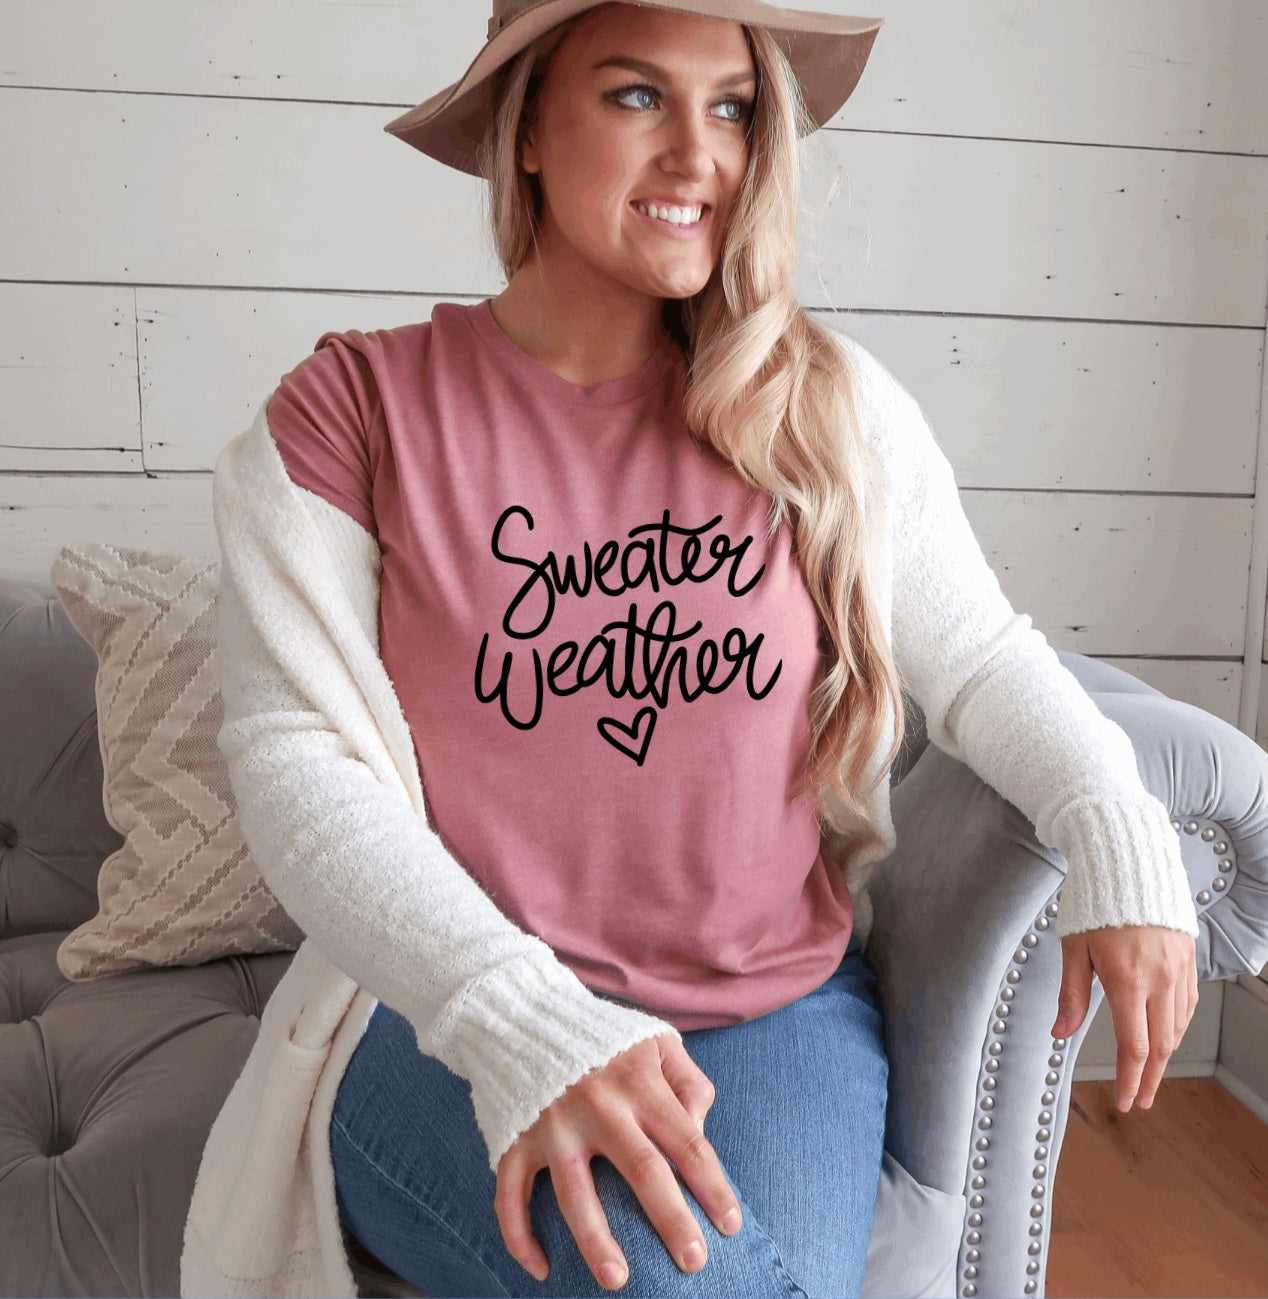 Sweater weather t-shirt 